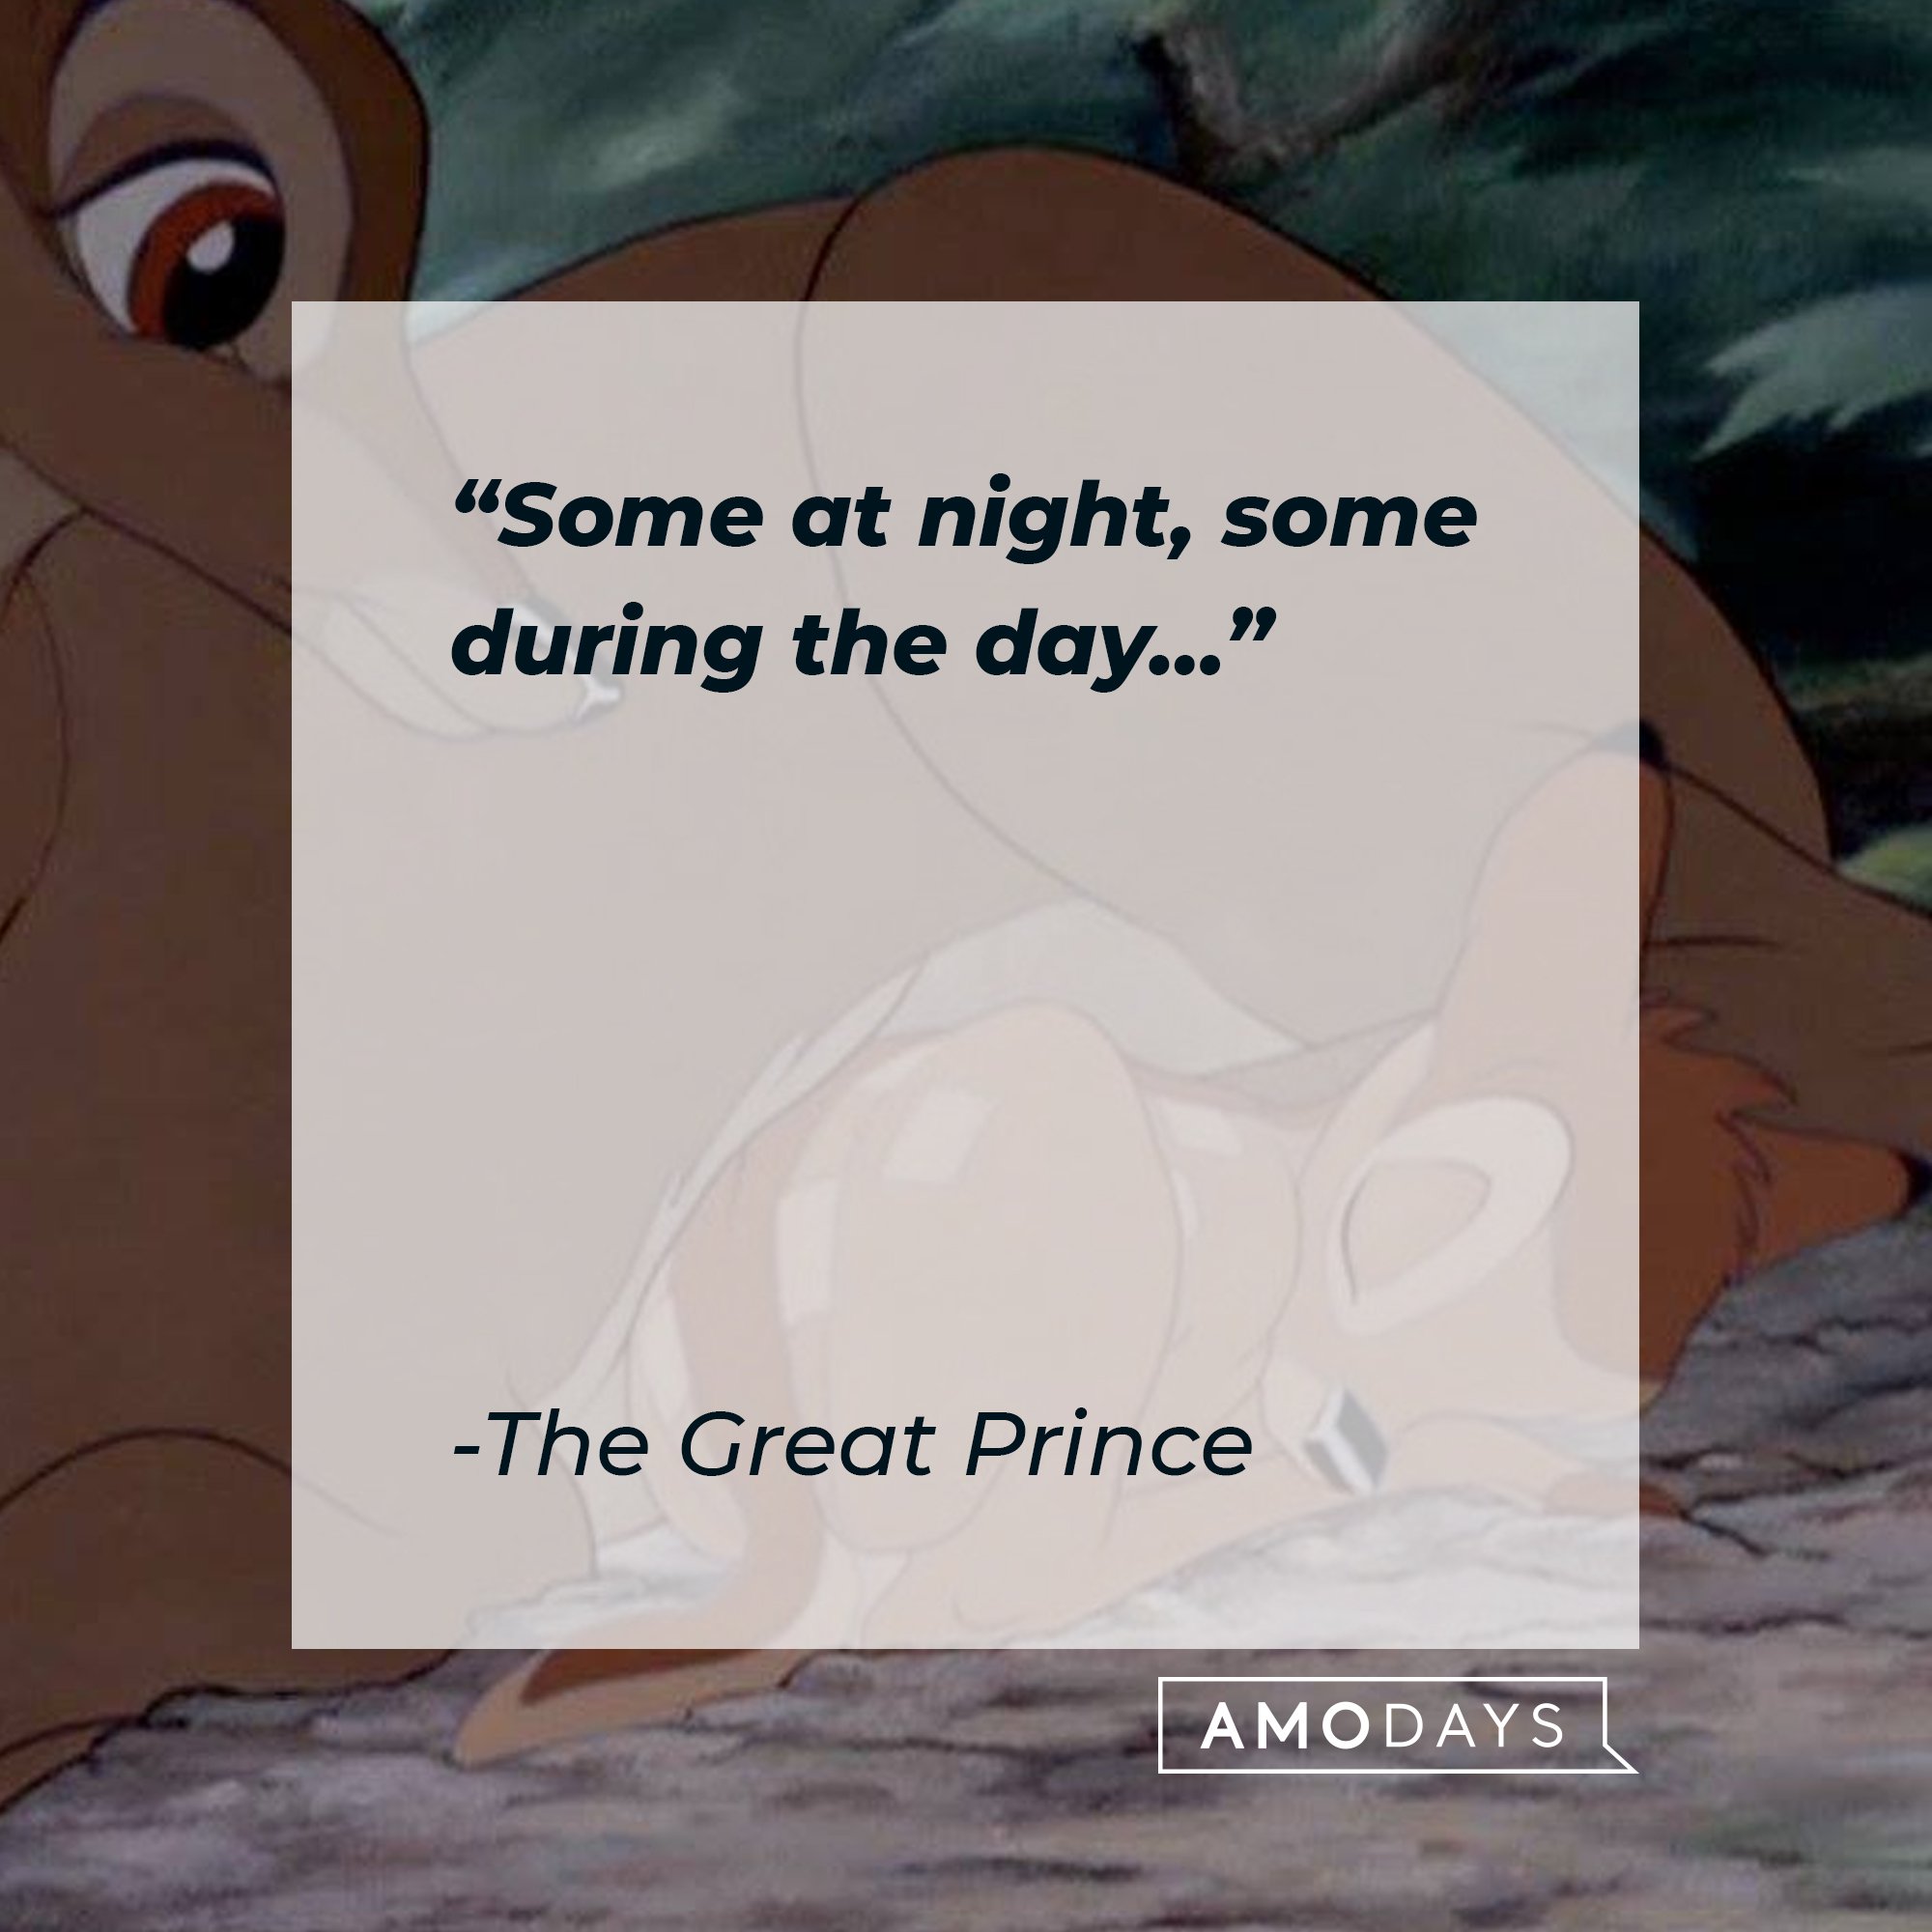 The Great Prince's quote "Some at night, some during the day…" | Source: facebook.com/DisneyBambi